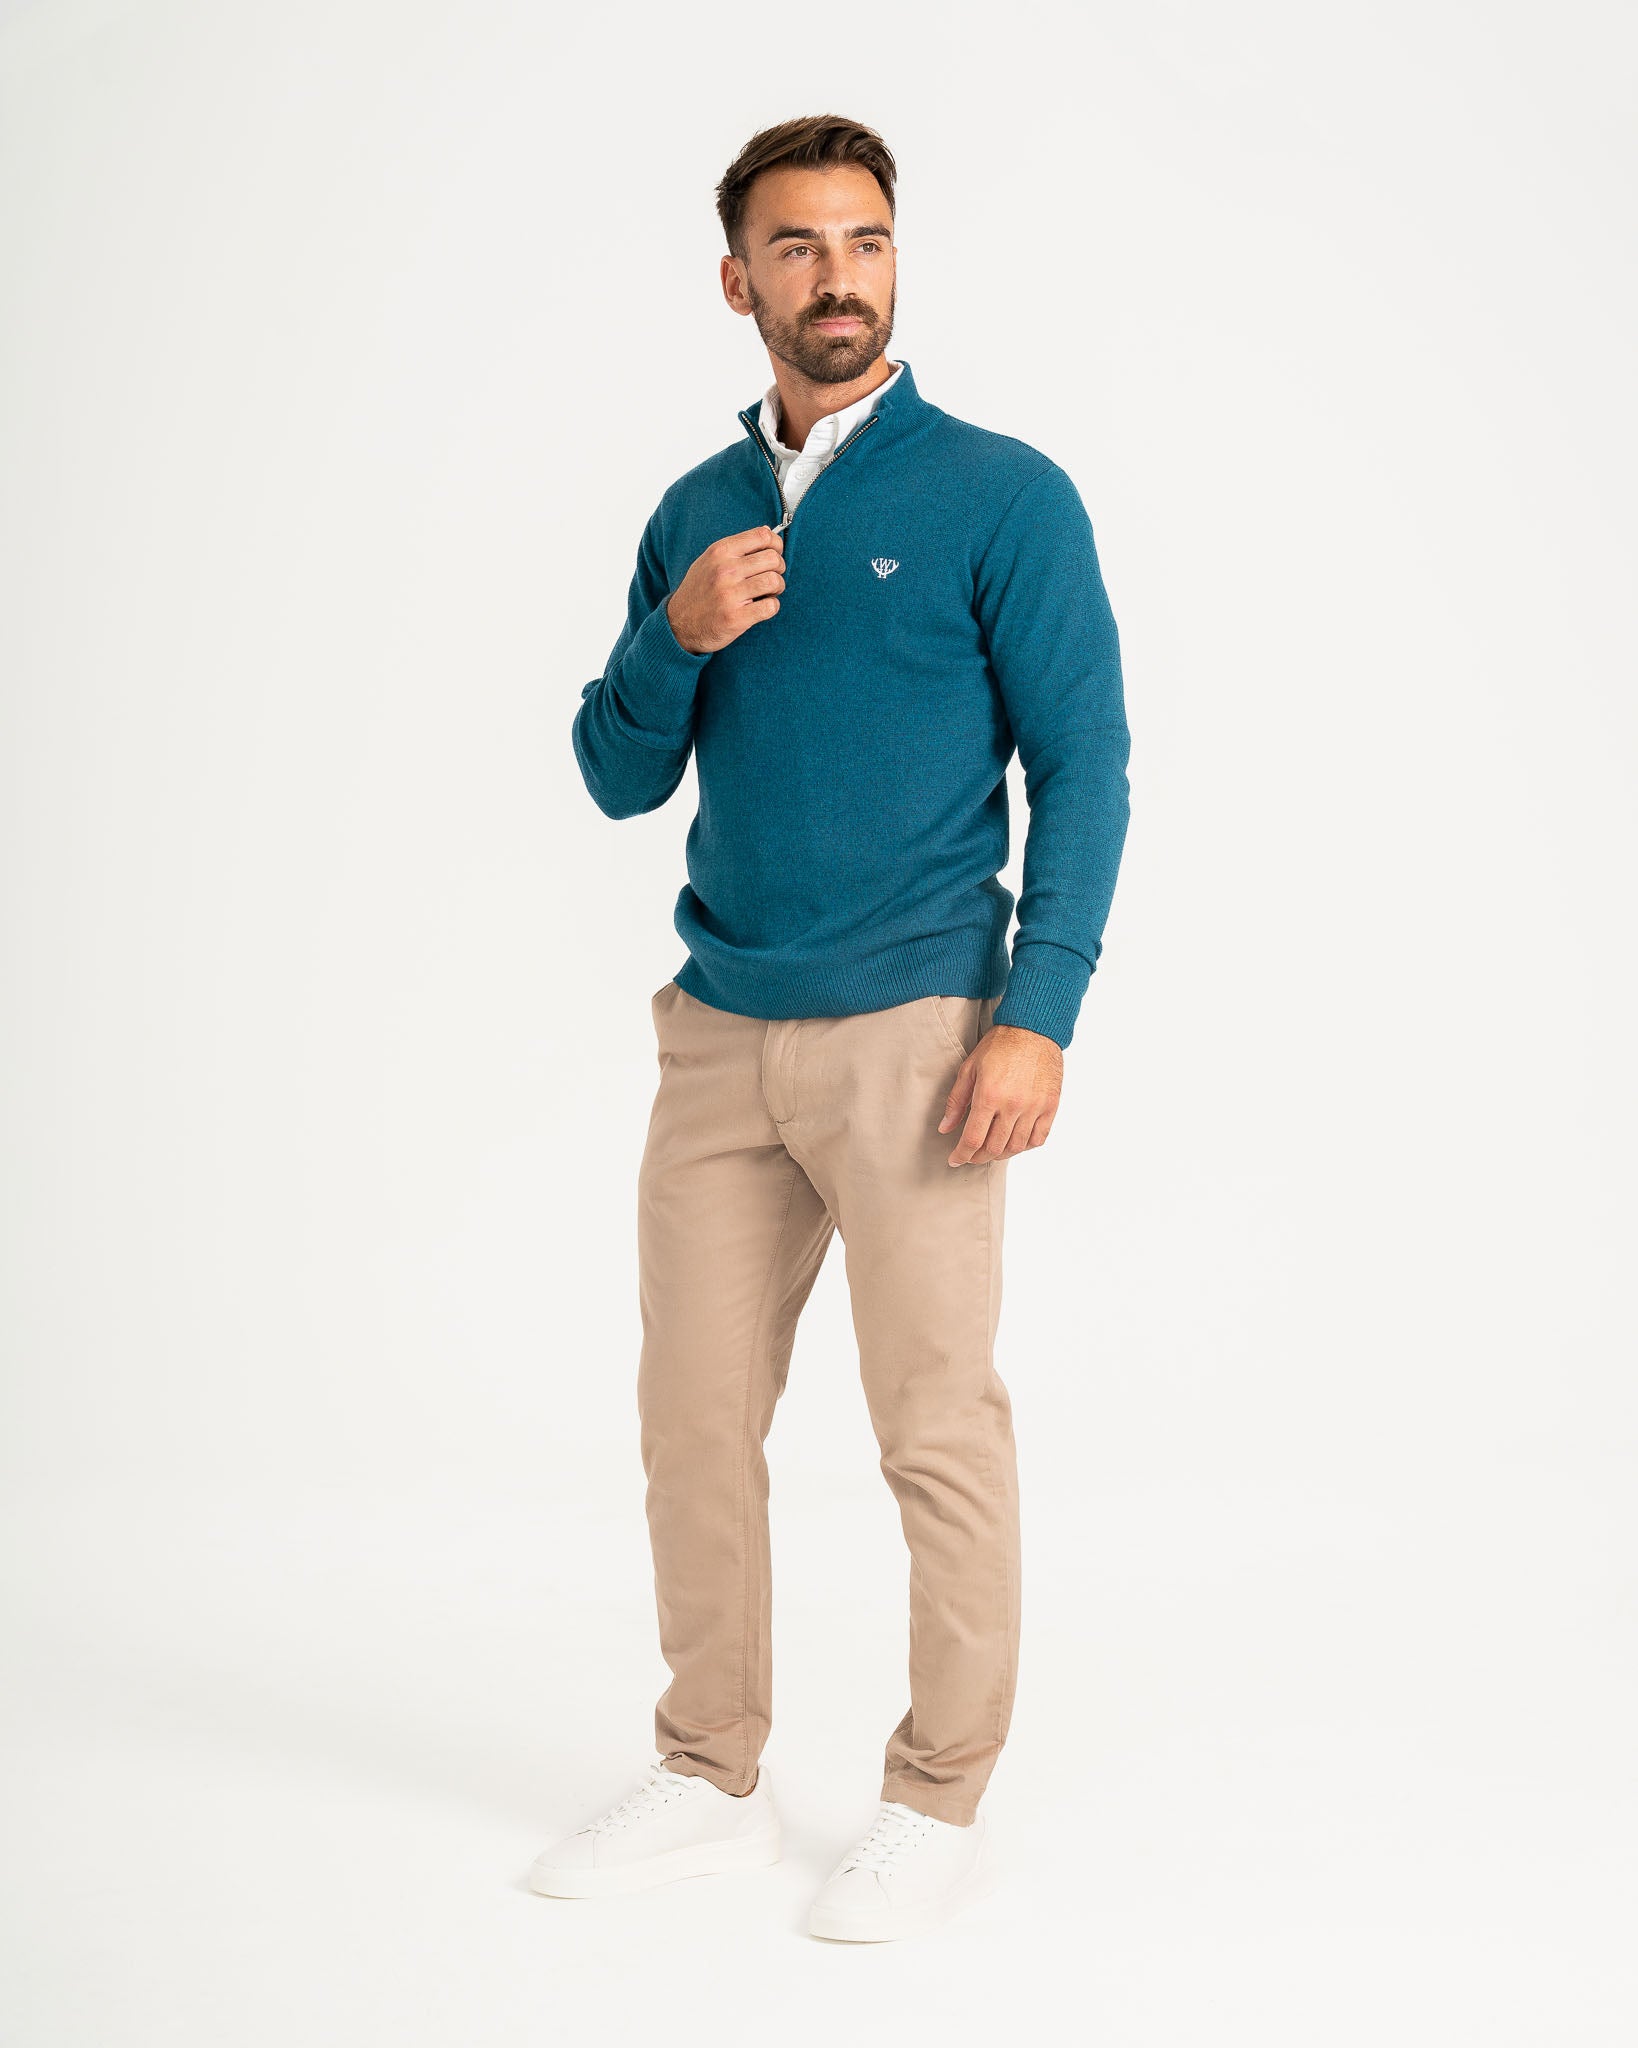 Saxony Blue Knitted 1/4 Zip